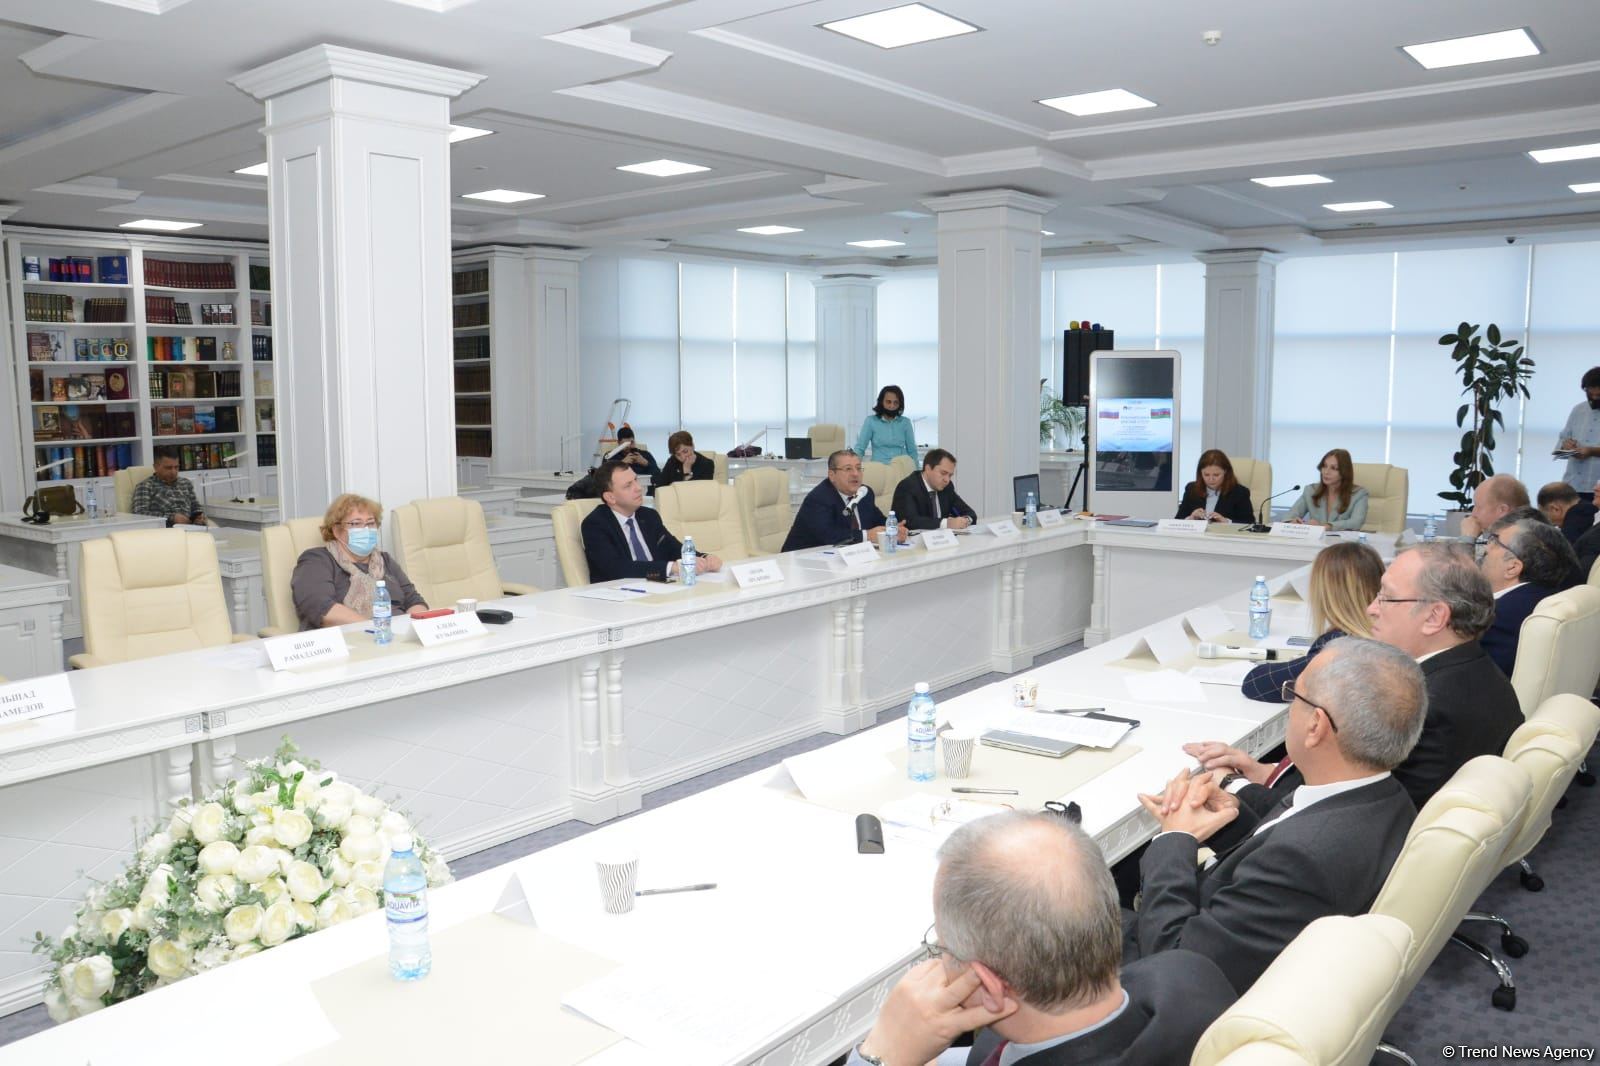 Azerbaijani, Russian experts discuss prospects for development of Baku-Moscow ties (PHOTO)